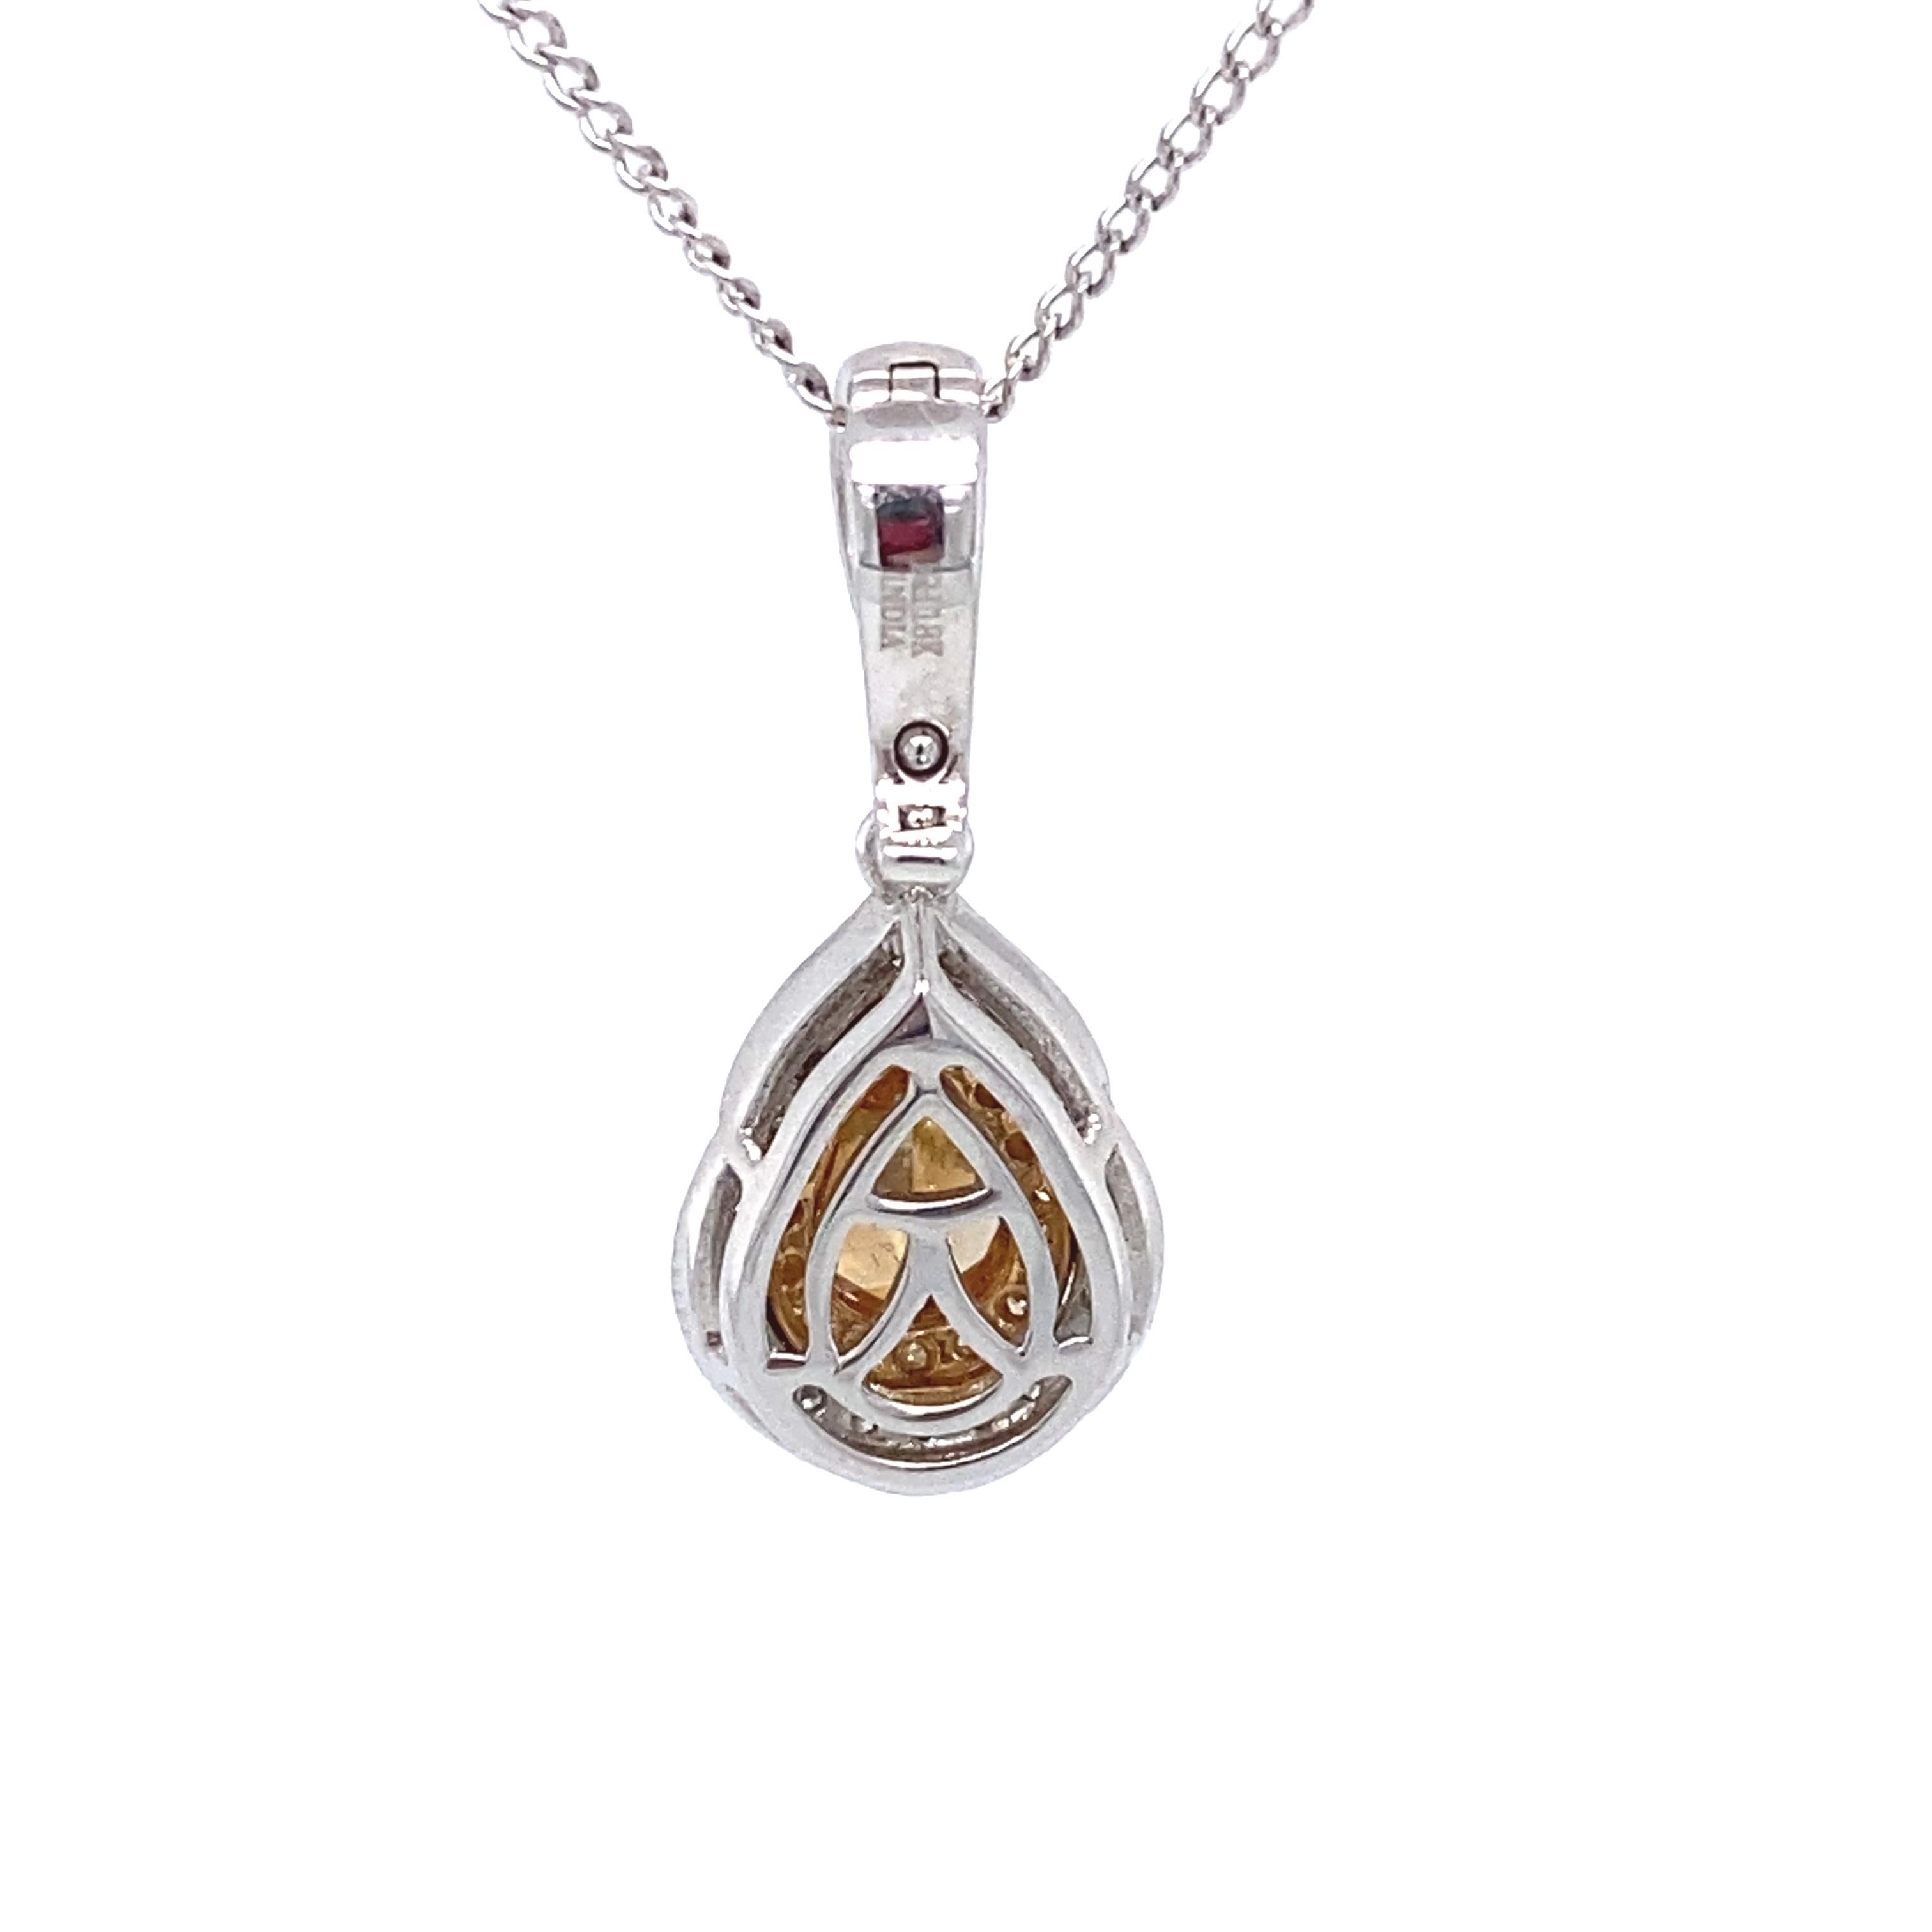 Modern 1.82 Carat Total Fancy Brown, Yellow and White Diamond Pendant in 18K White Gold